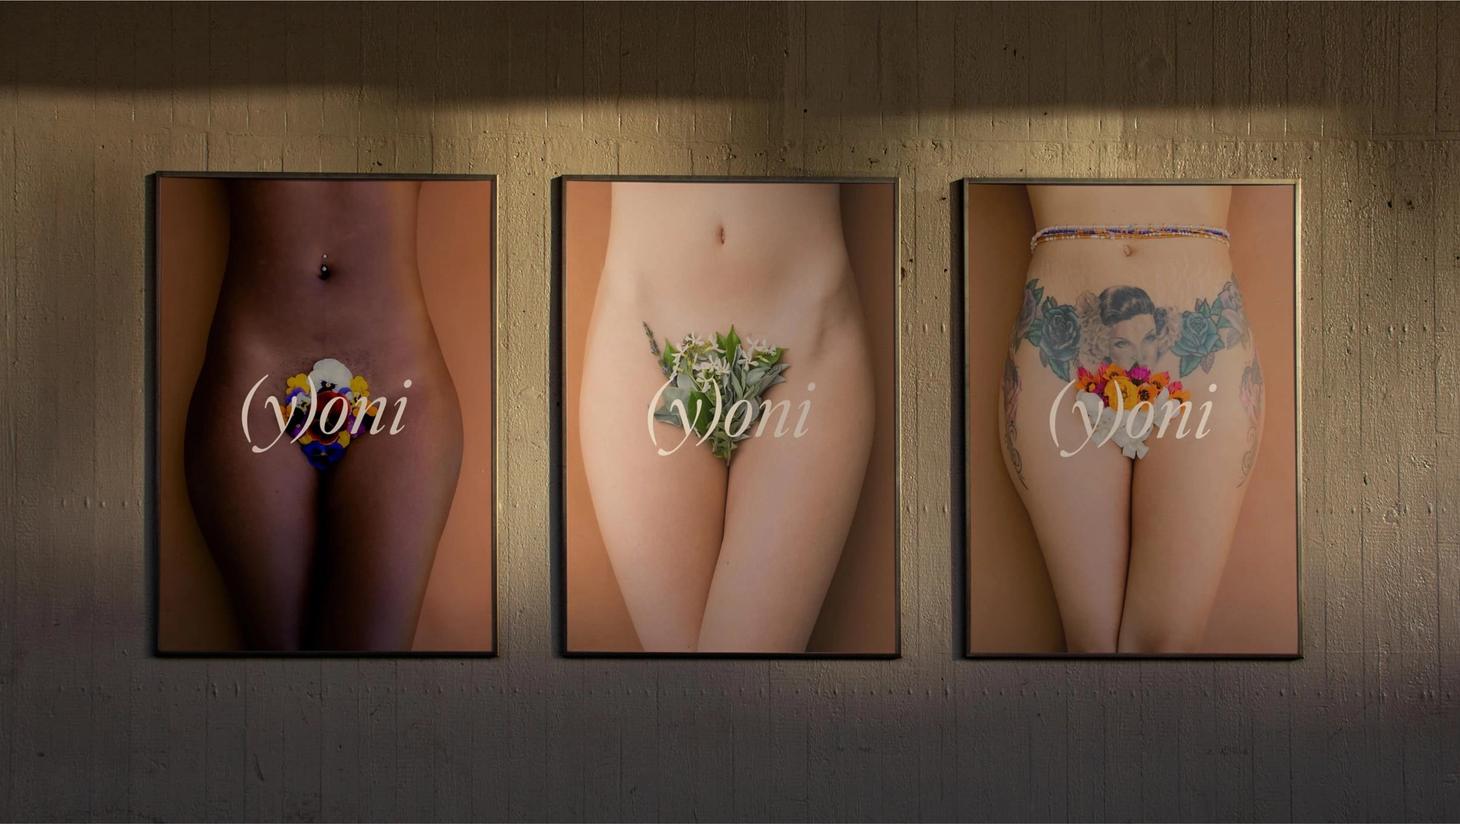 Provocative advertisements for Surya Spa's (y)oni product